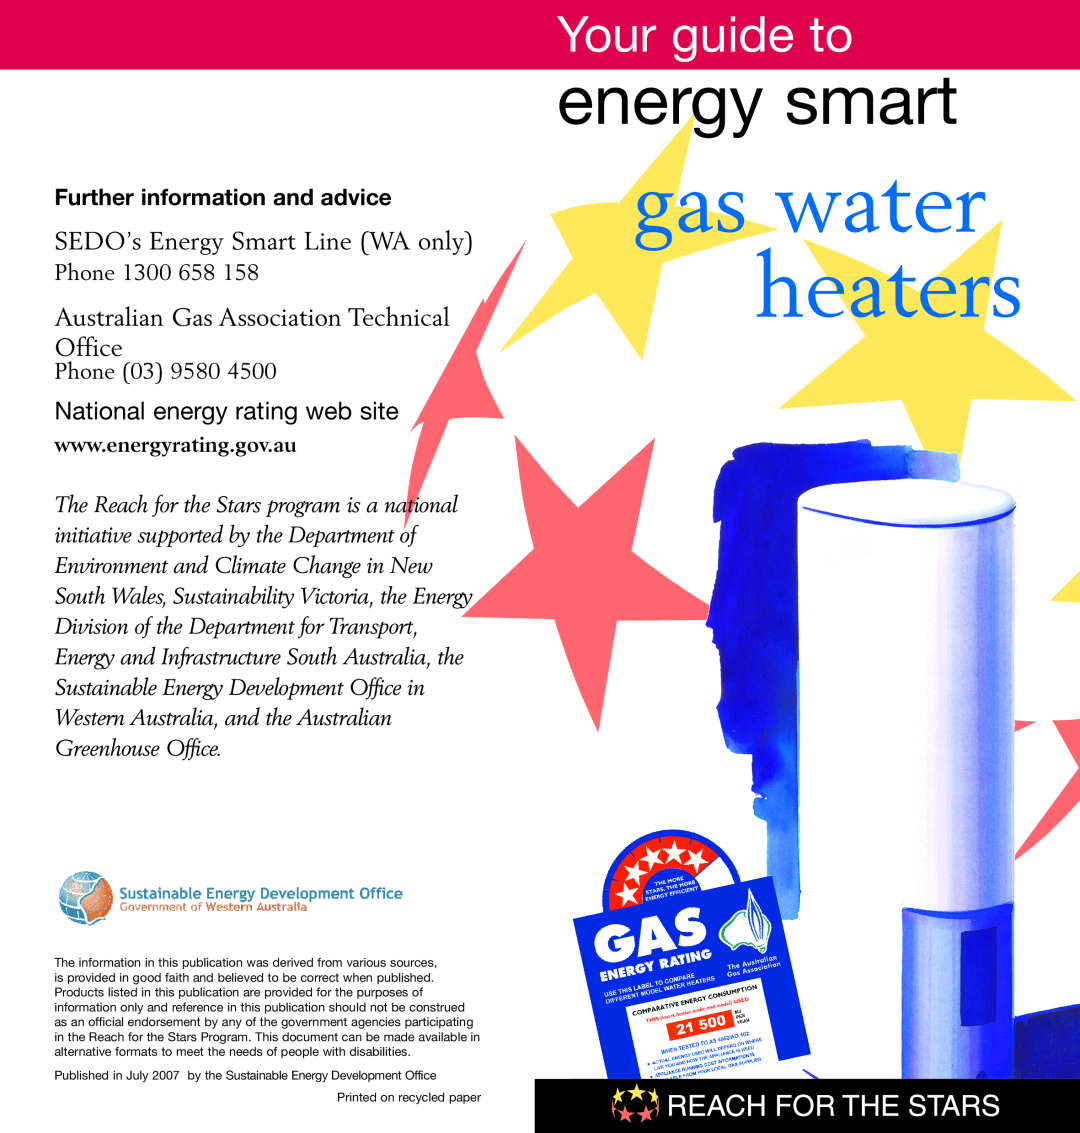 Energy Tech Laboratories SS120 brochure gas water heaters, energy smart, Your guide to, SEDO’s Energy Smart Line WA only 